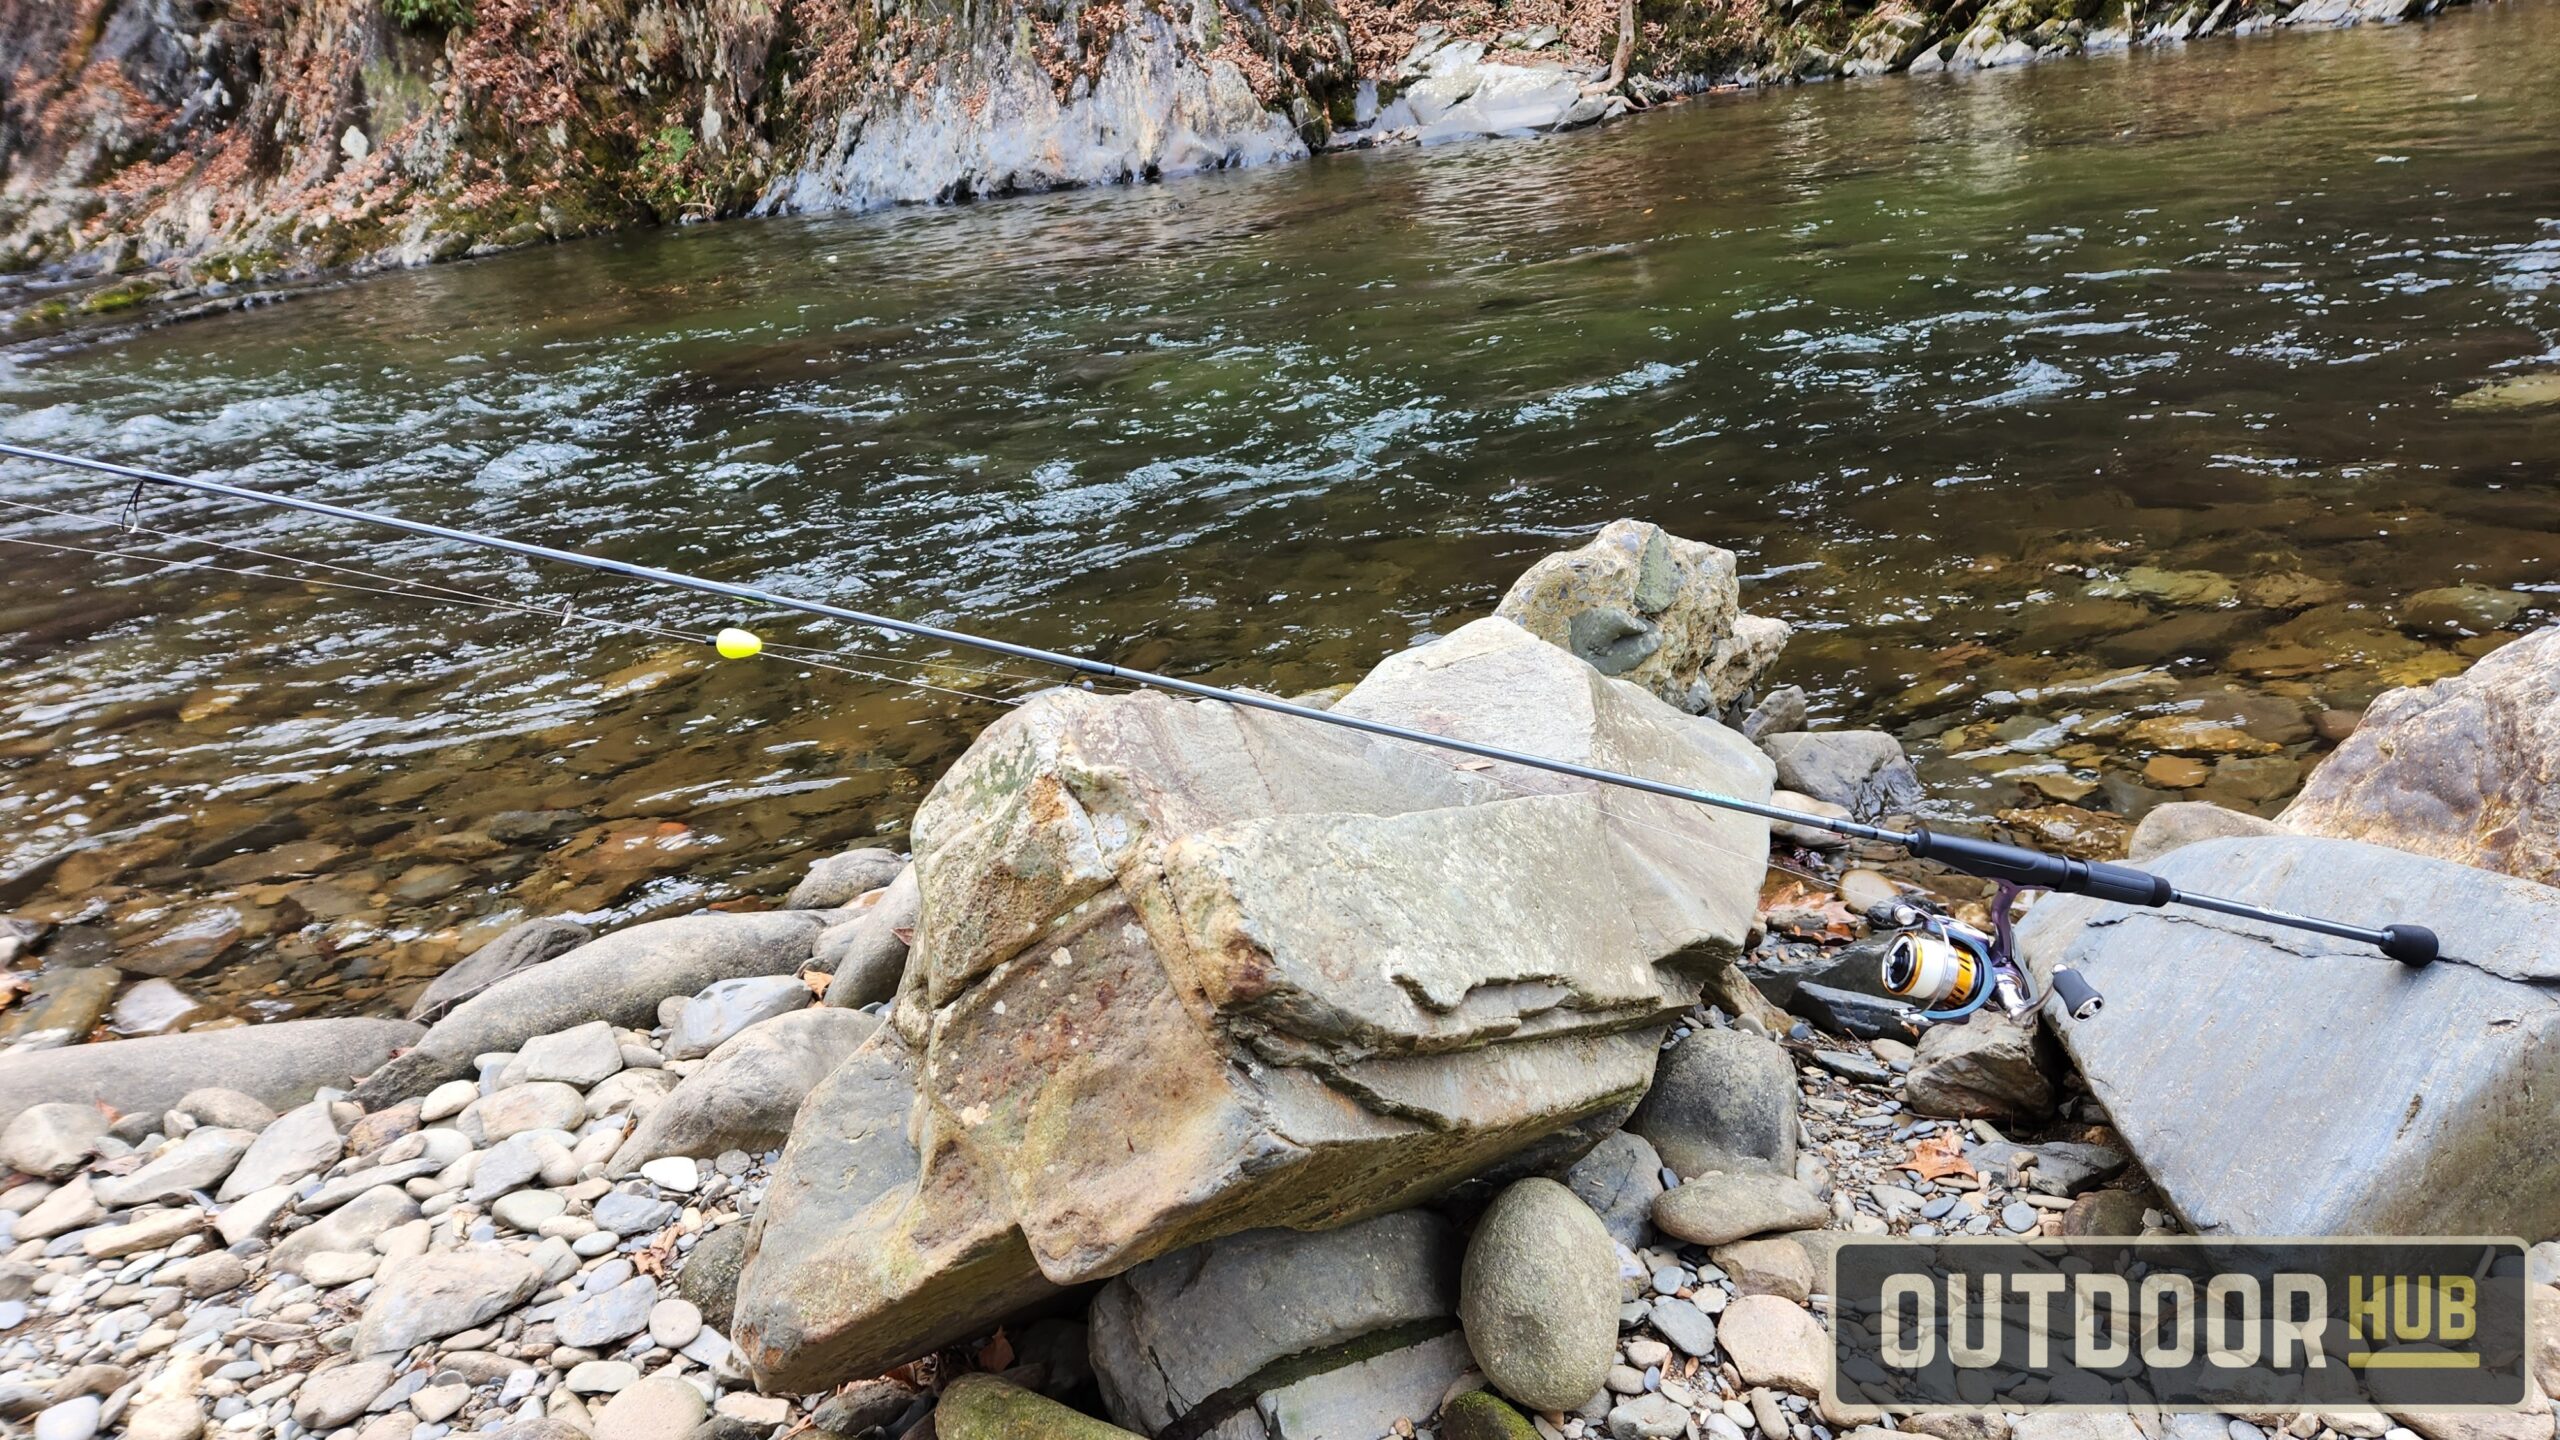 OutdoorHub Review: St. Croix Trout Series Spinning Rod 7ft Light